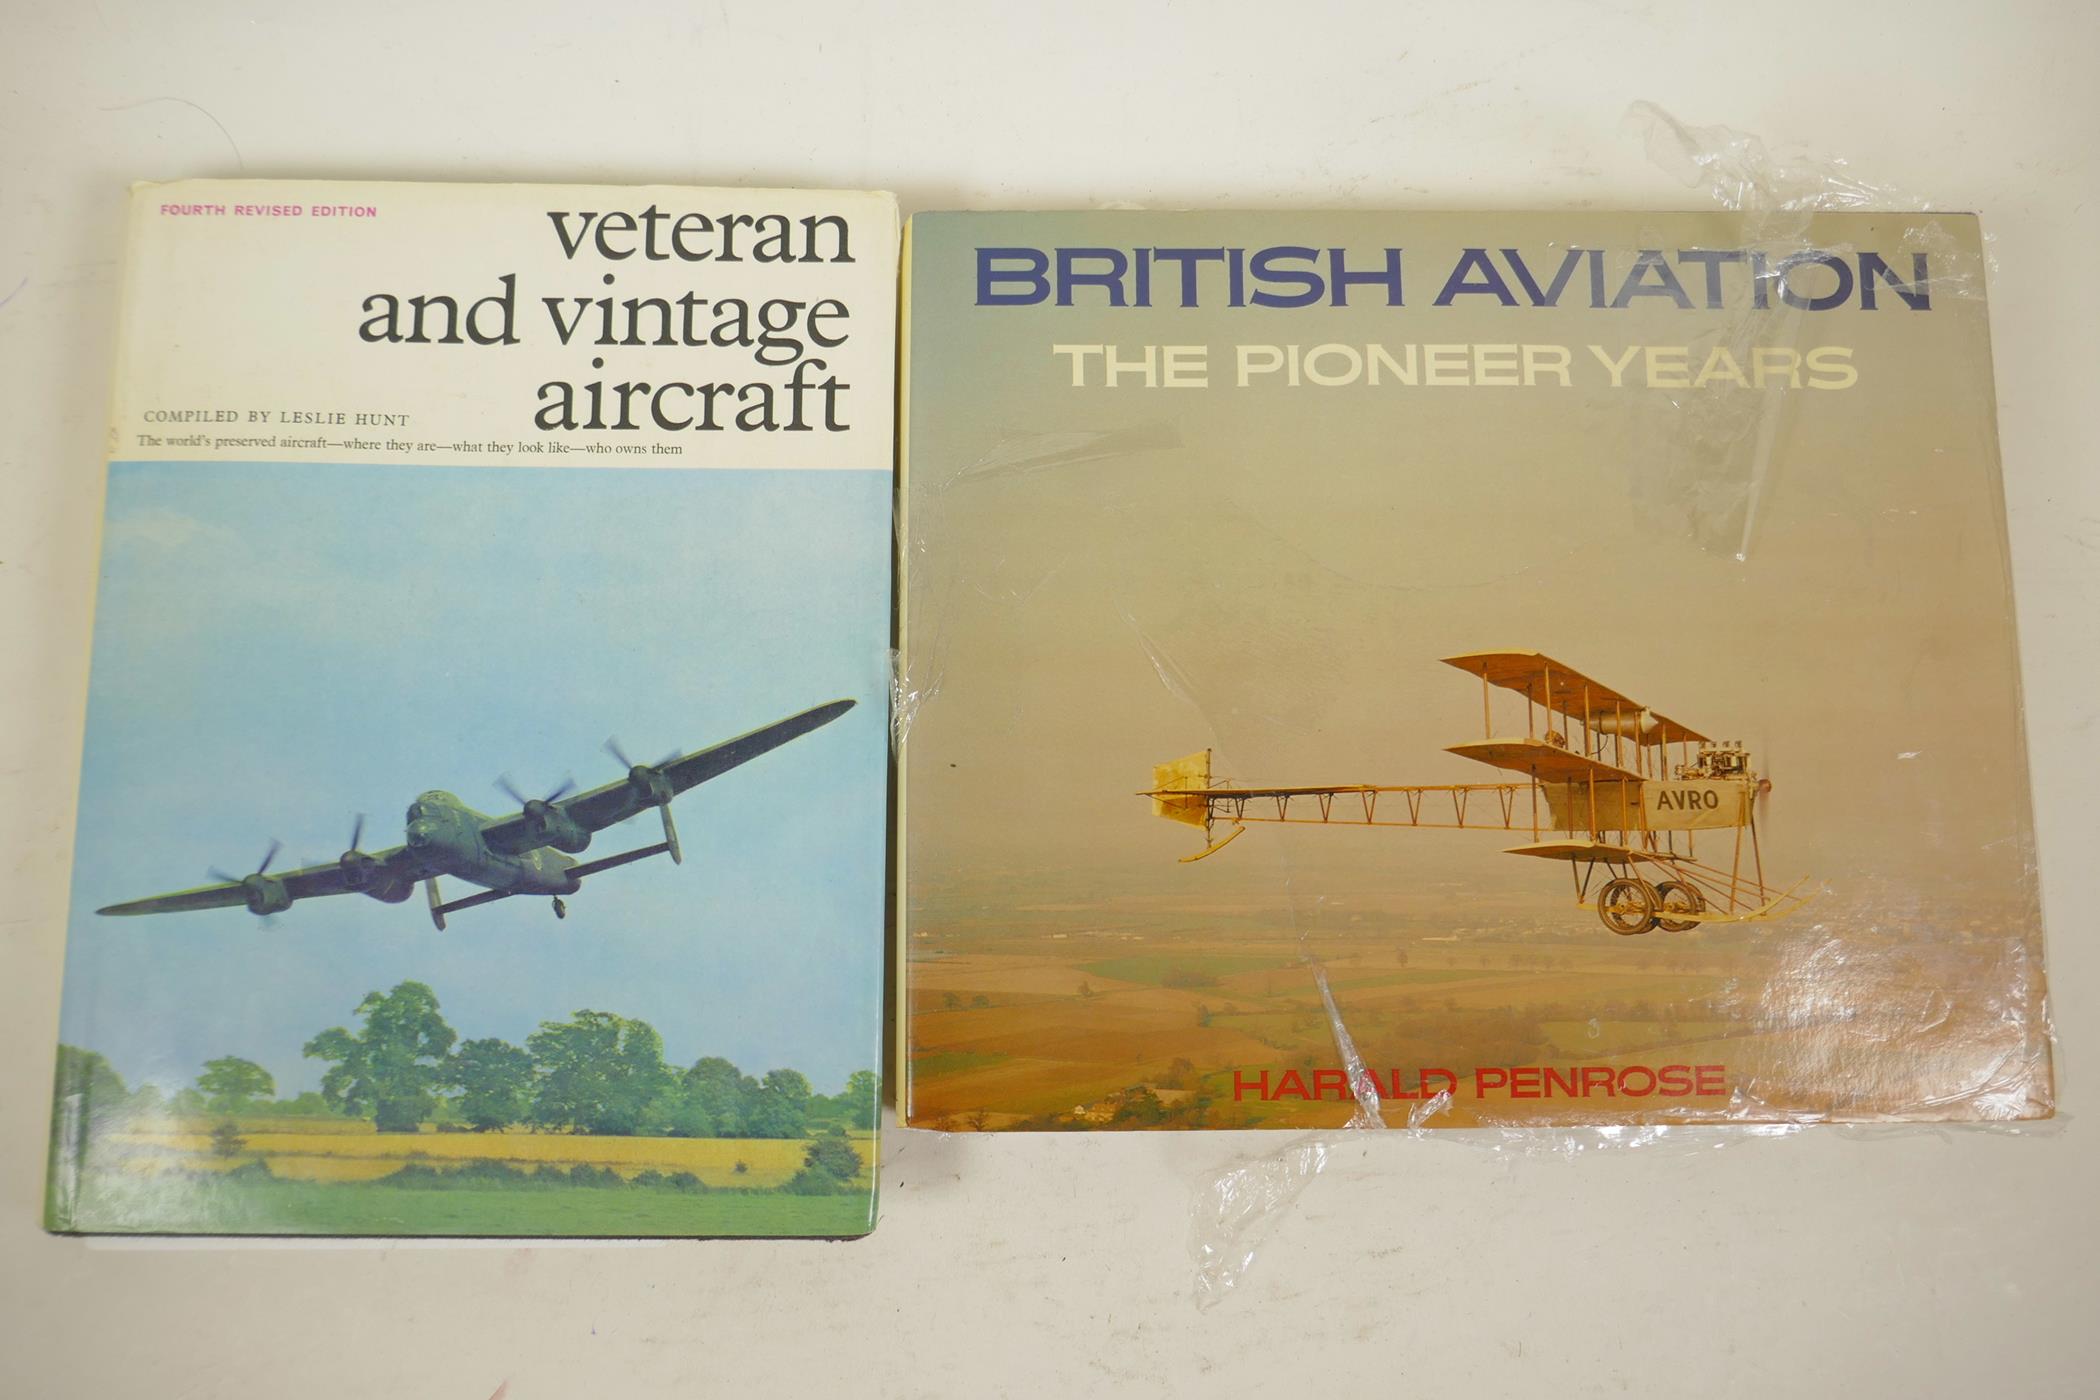 Two volumes, 'Bristol Aviation The Pioneer Years', by Harold Penrose and 'Veteran and Vintage